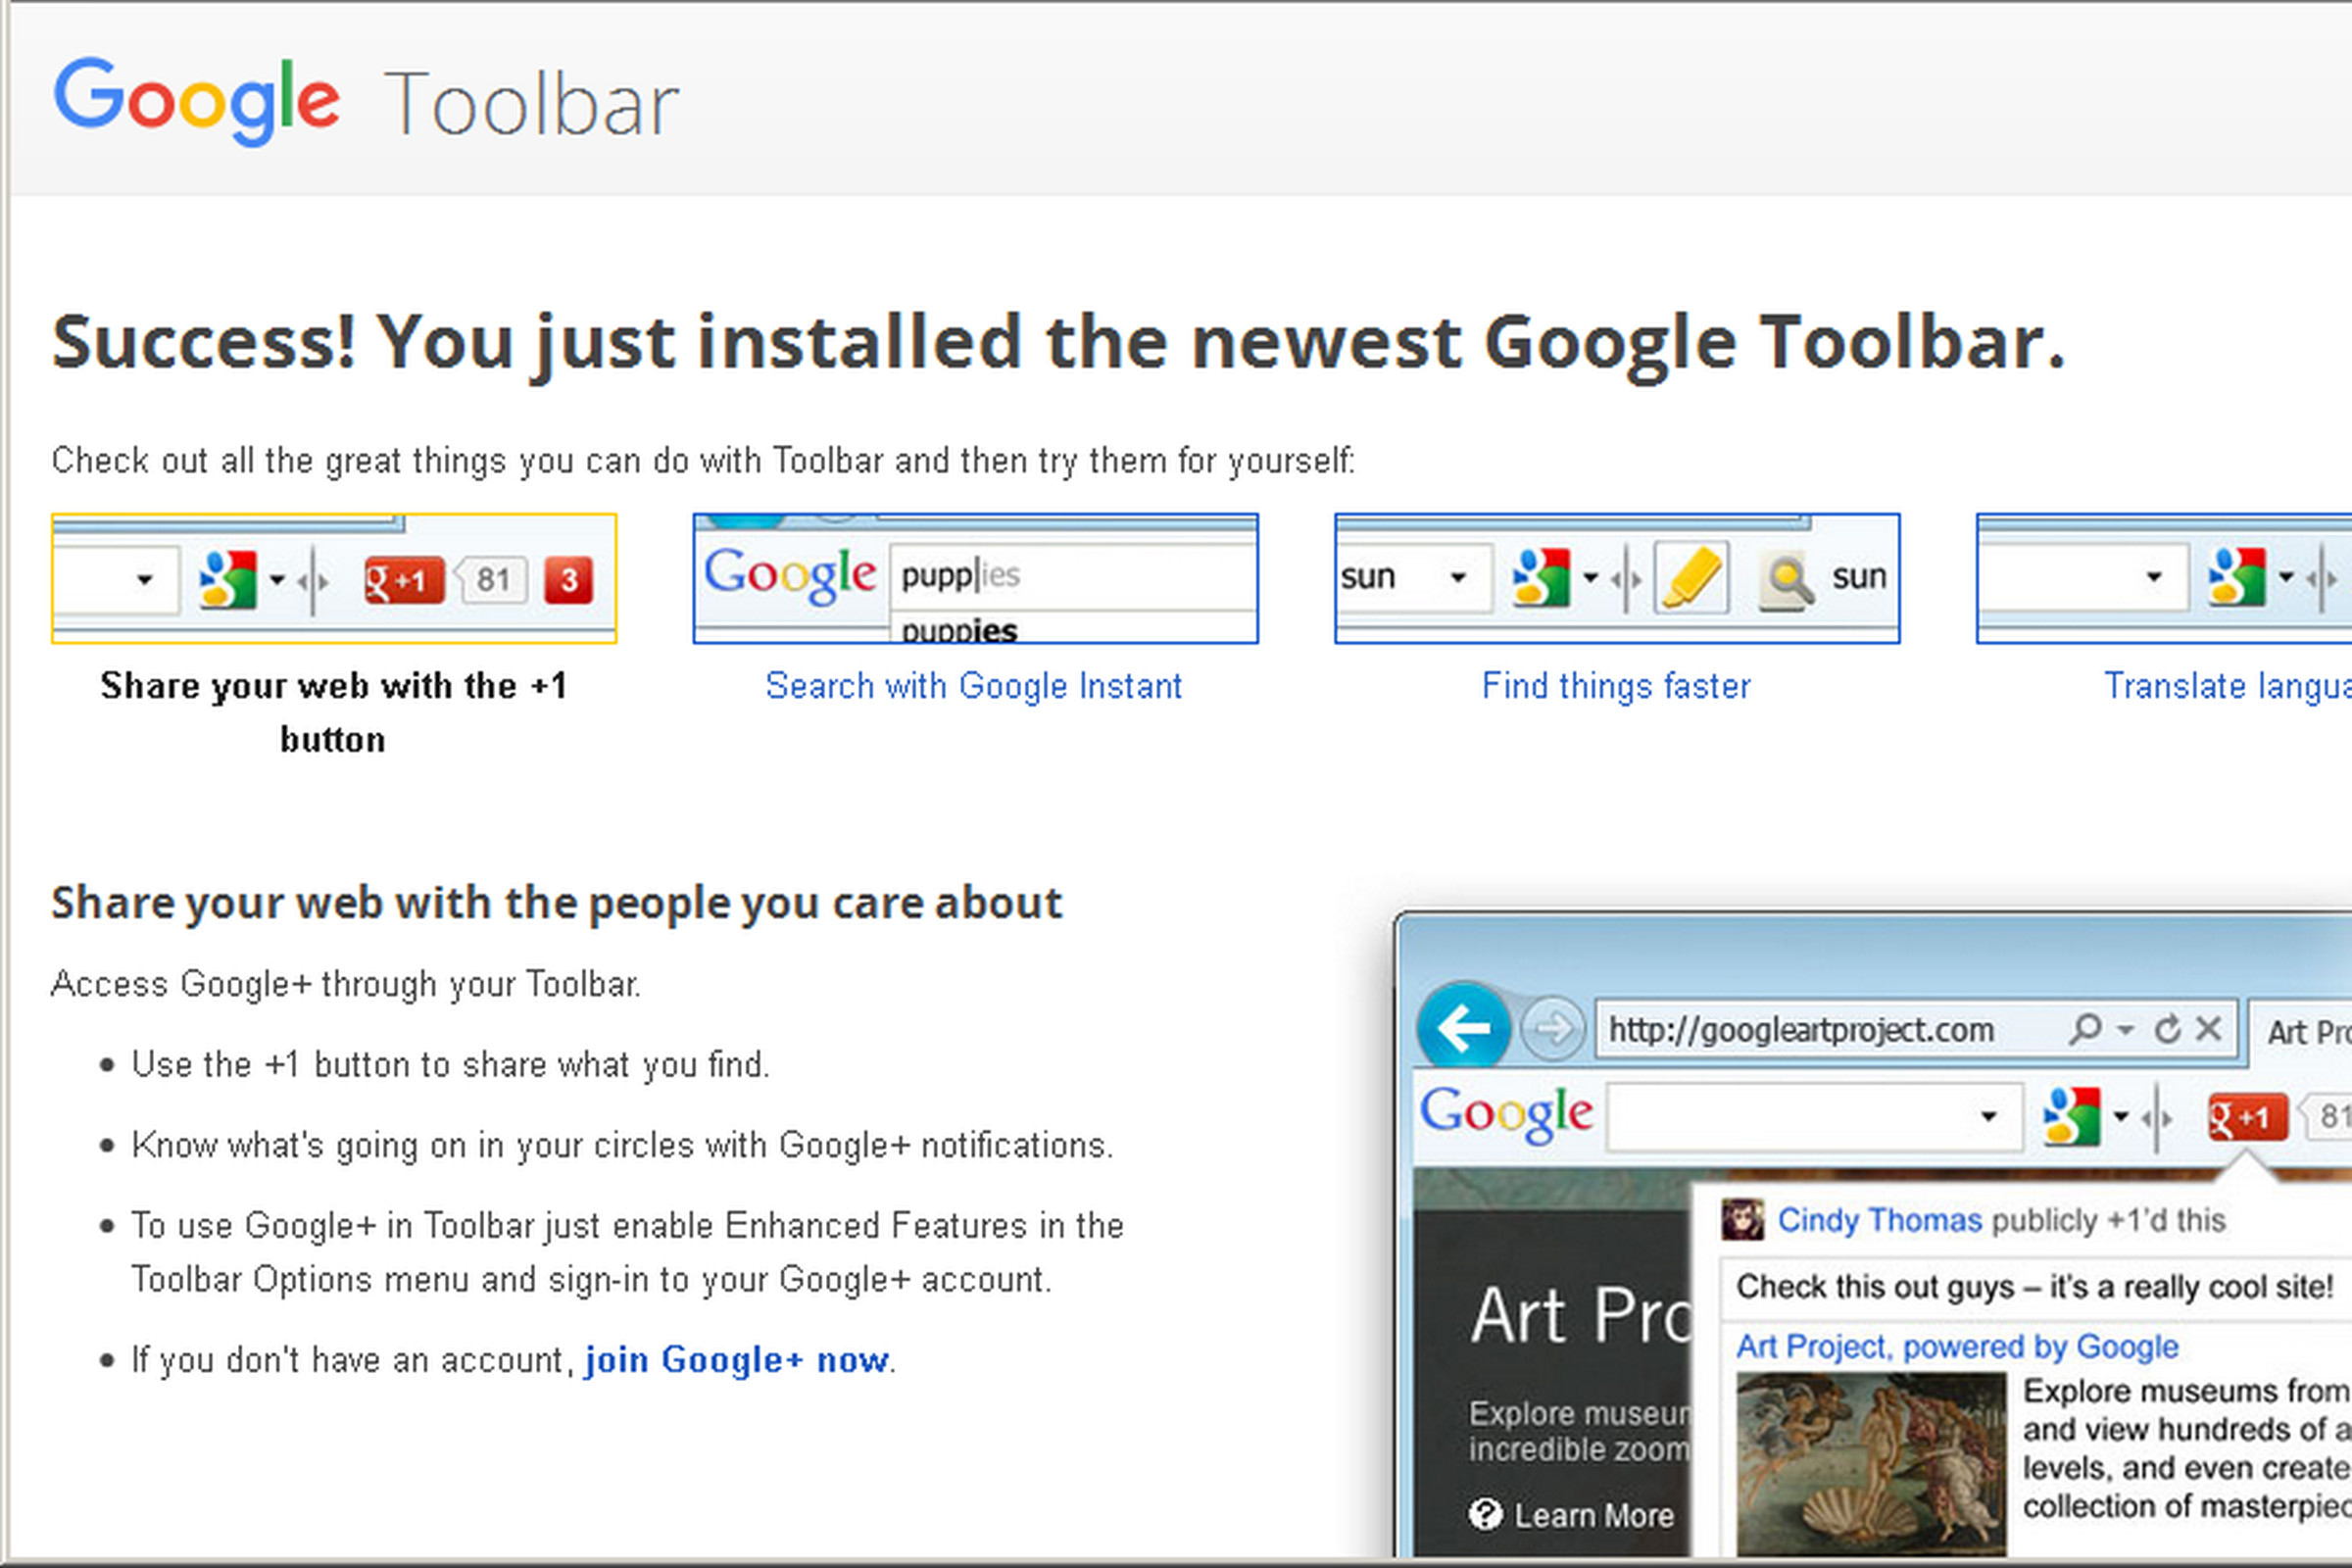 This is the page that opens after installing Google Toolbar, giving a synopsis of some of its features.